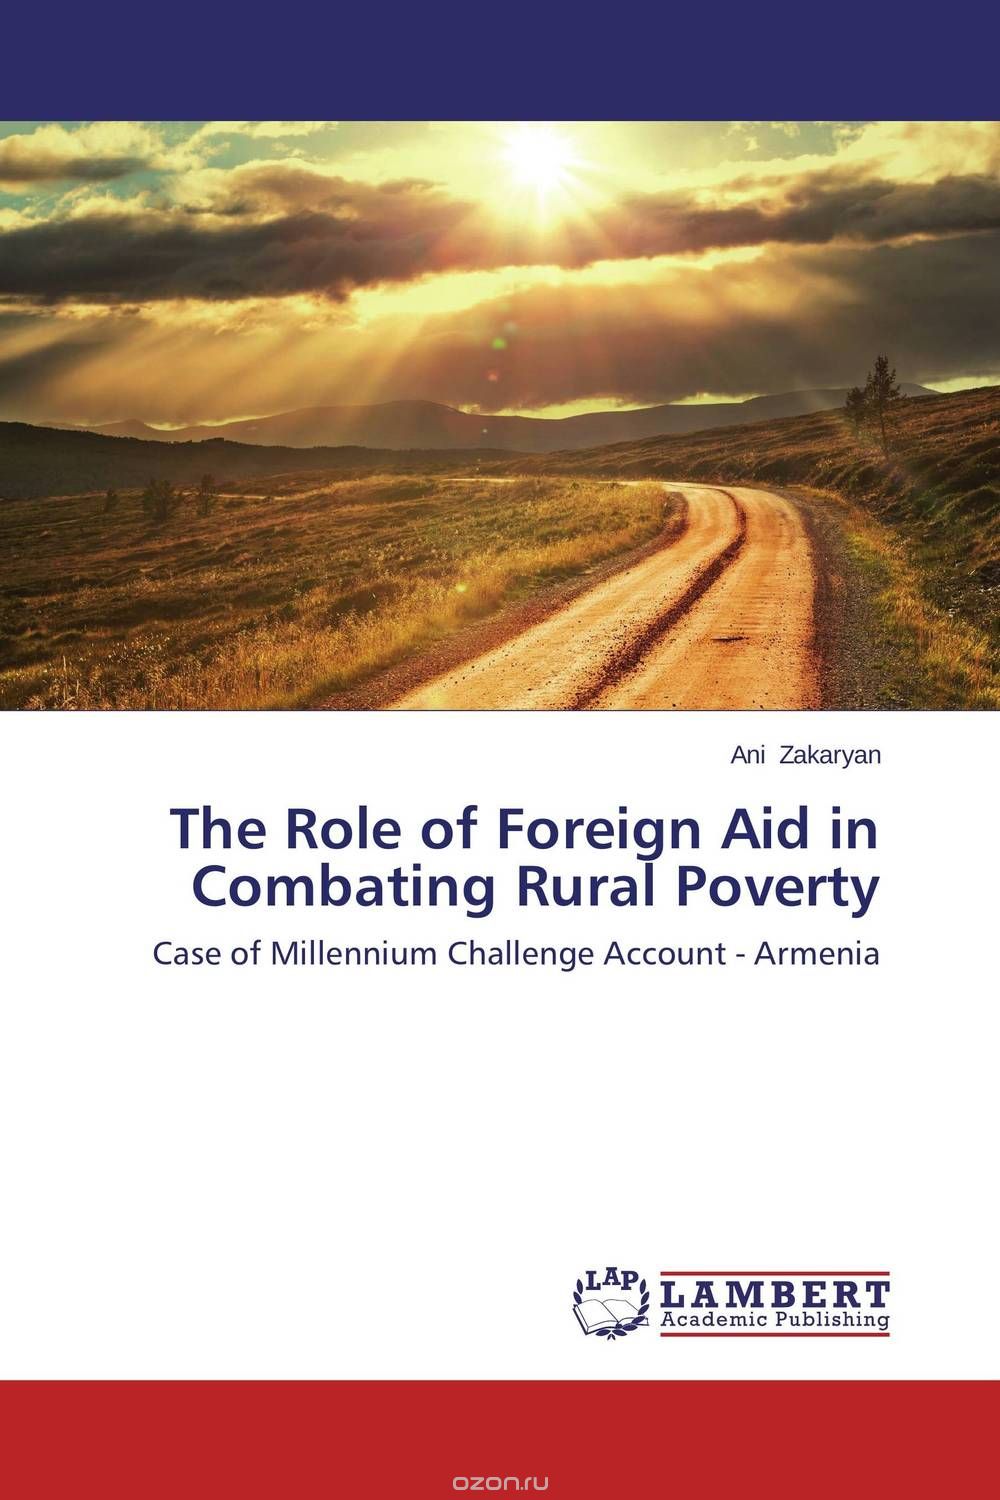 The Role of Foreign Aid in Combating Rural Poverty